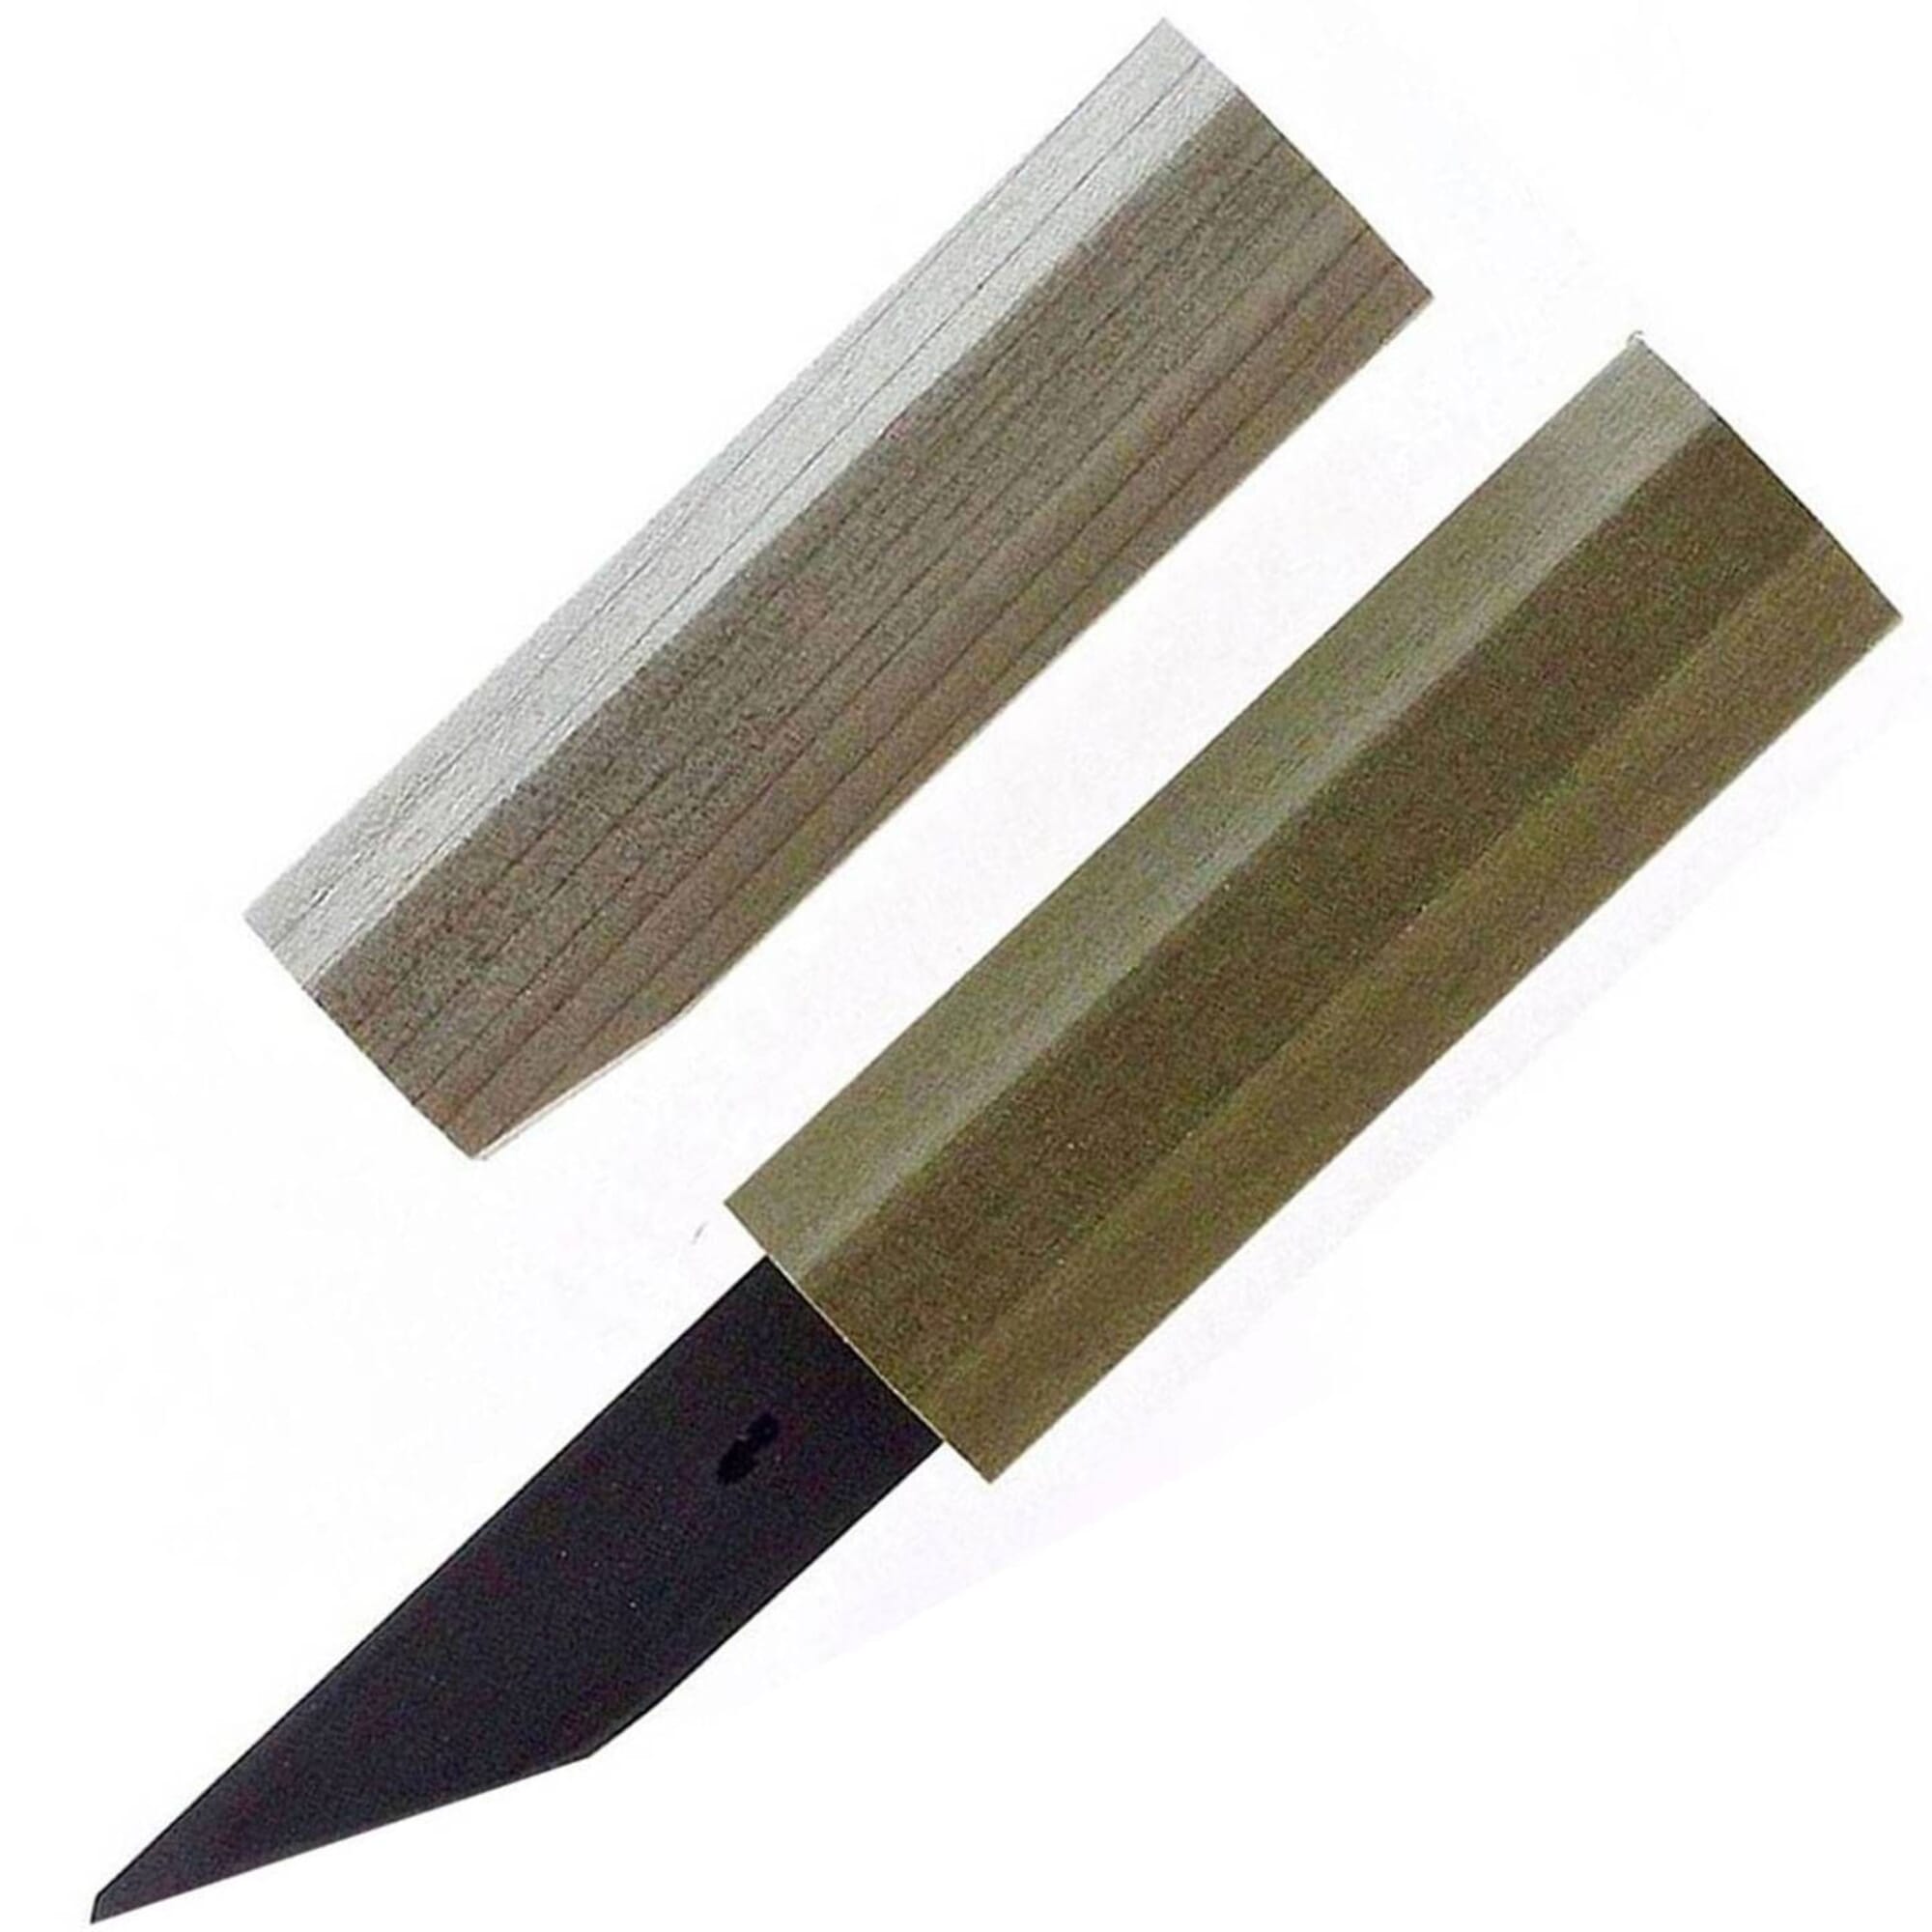 Suncraft WB-300 Japanese Kogatana Woodworking Whittling Tool Utility Knife  34mm for Trimming Wood Carving & Chip Carving